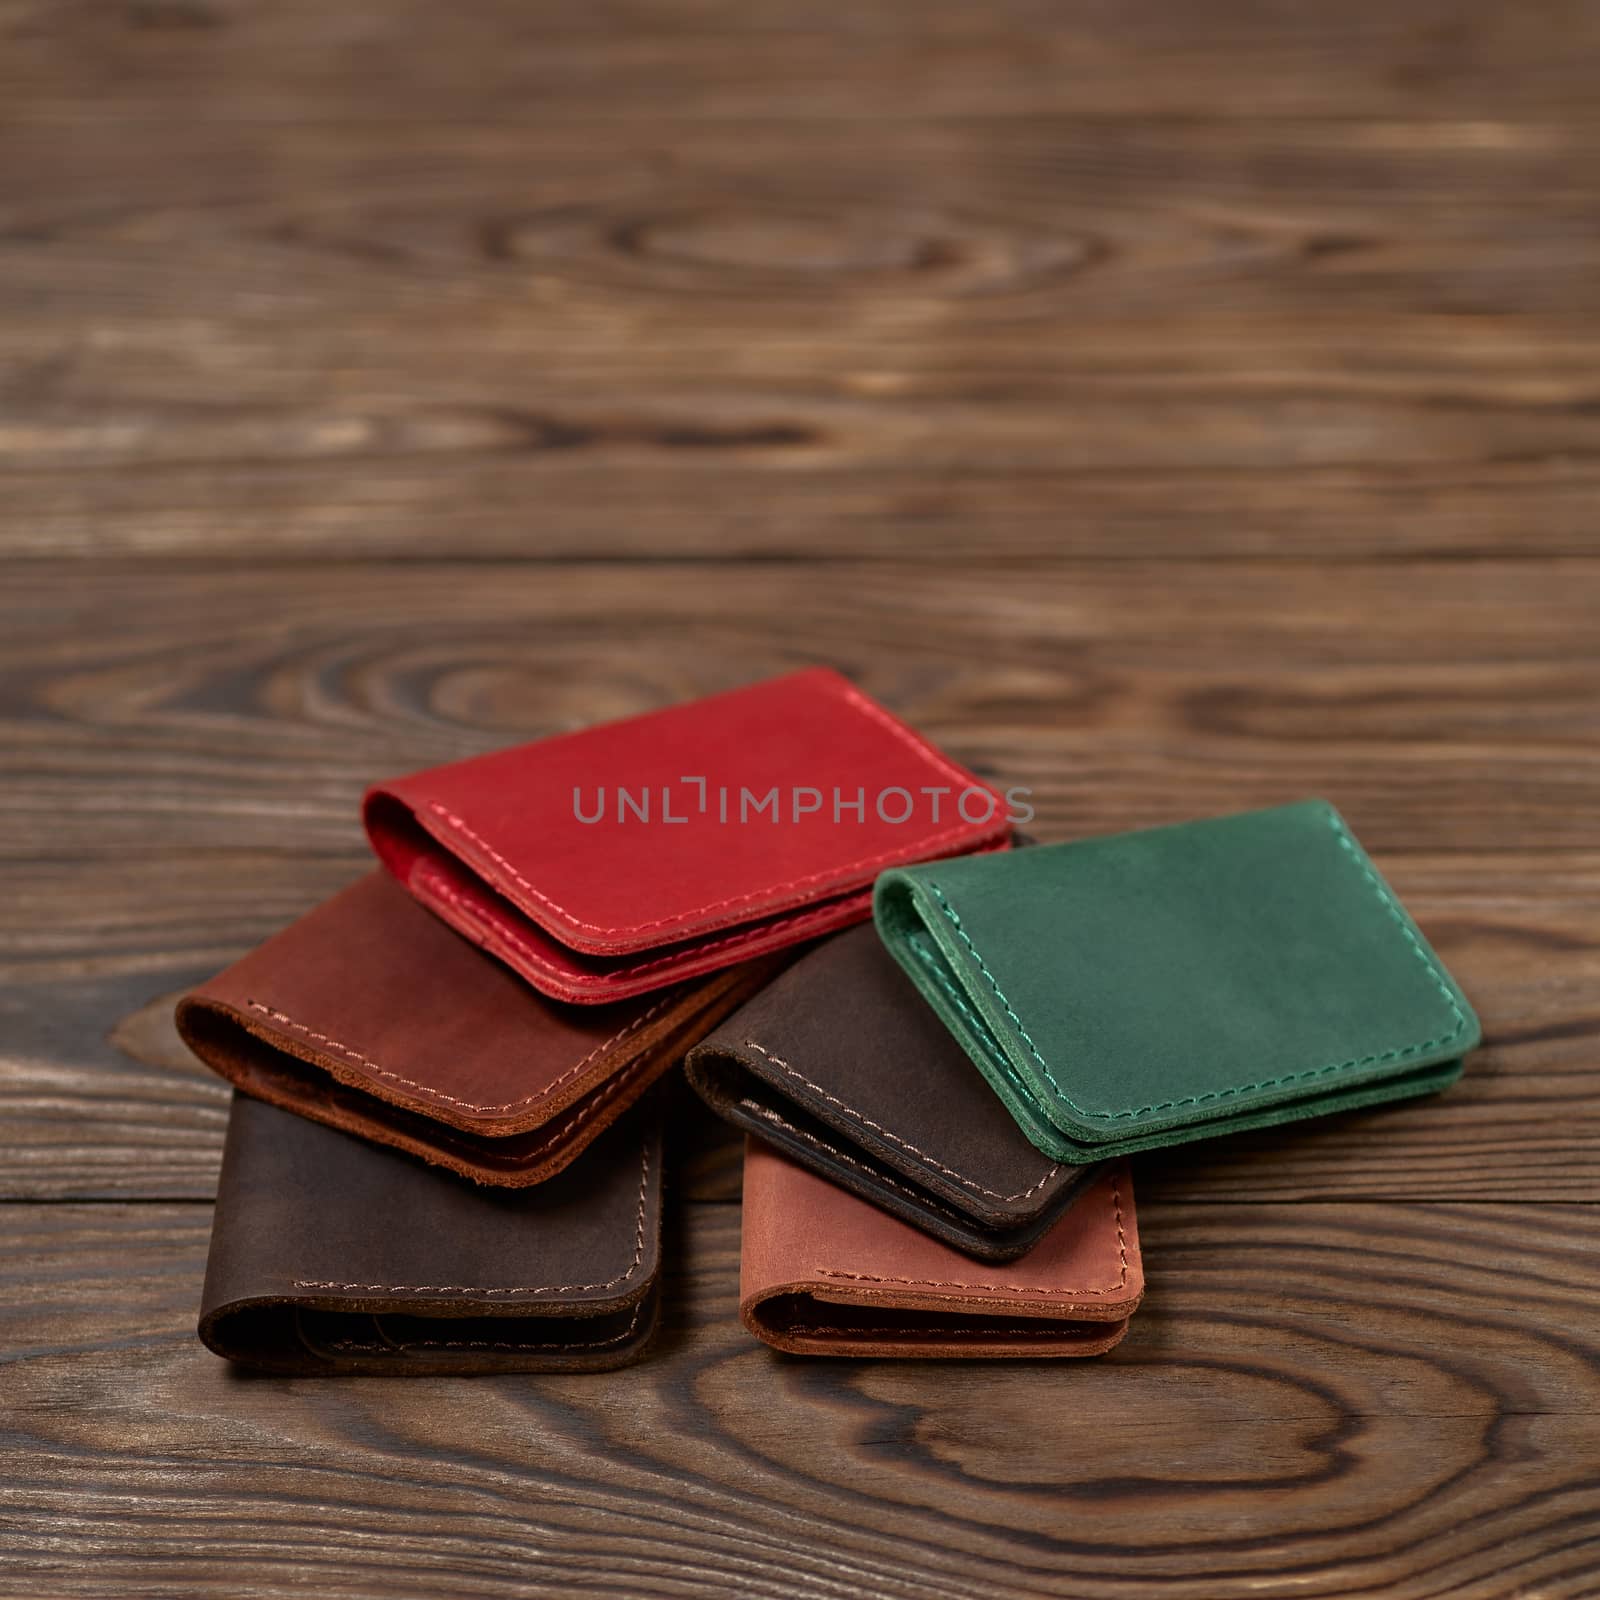 Six two-pocket leather handmade cardholder. Cardholders lies one on another. Stock photo on blurred background. by alexsdriver